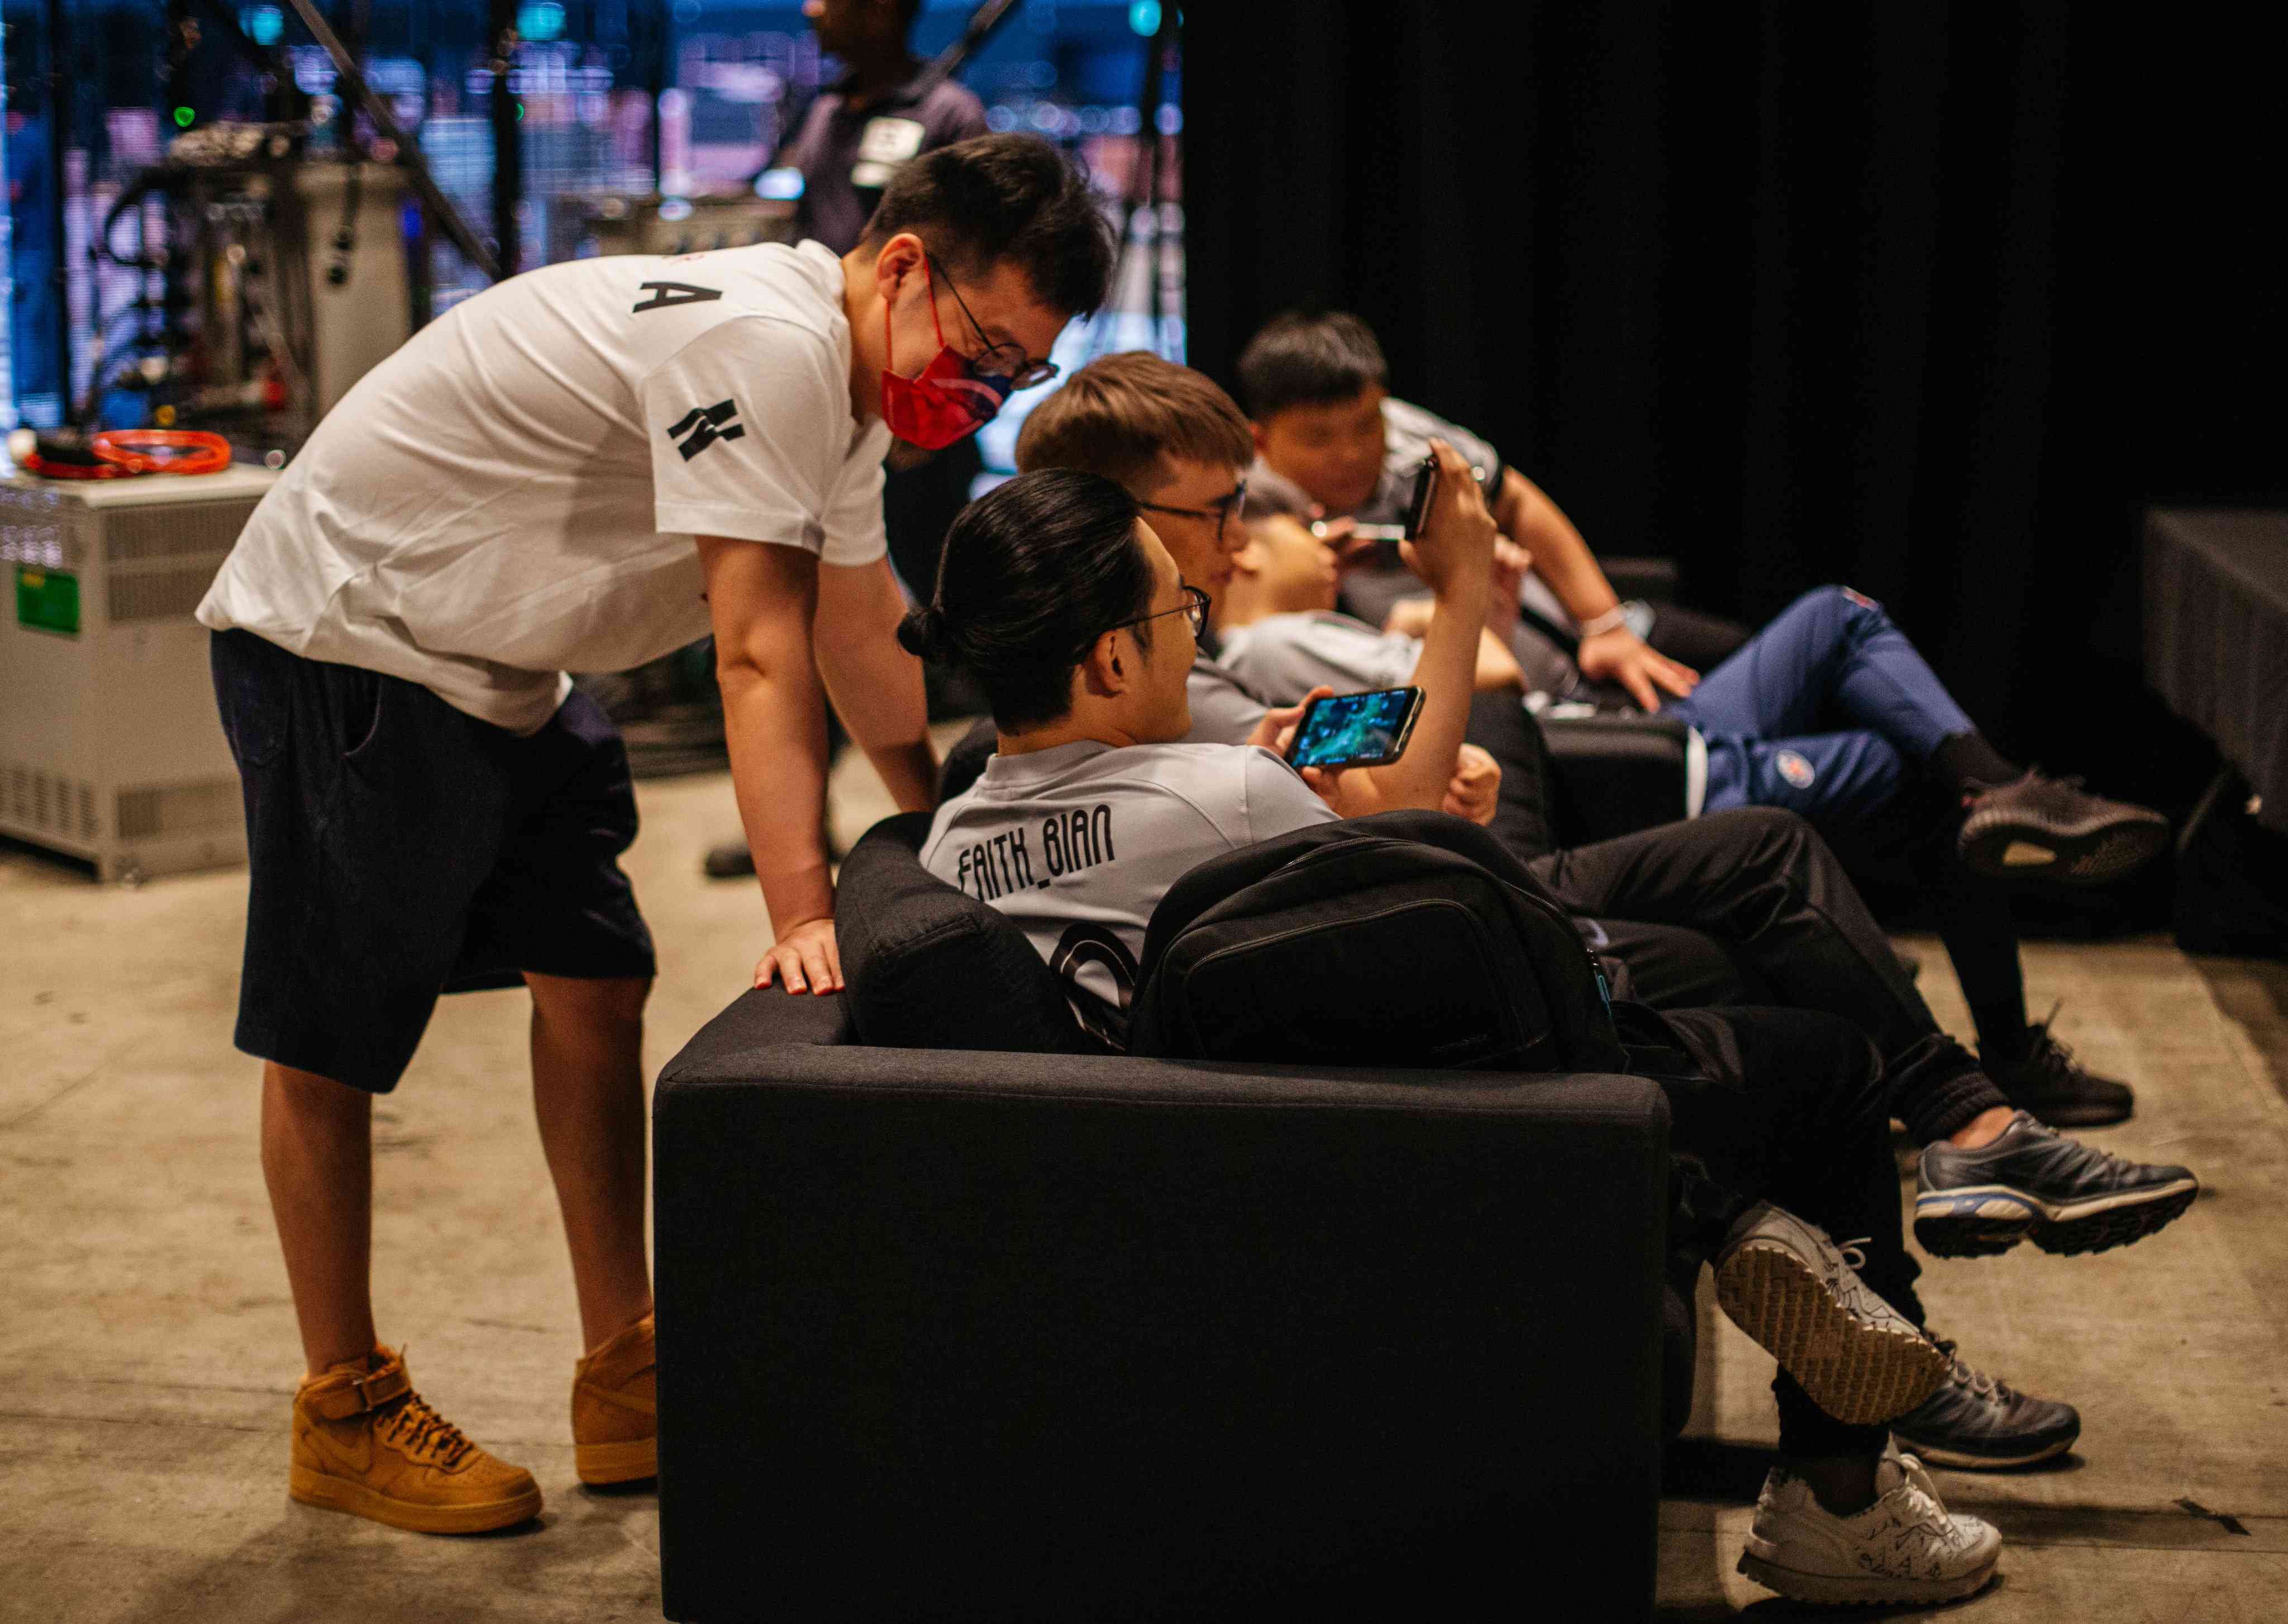 Players from LGD seated on couches backstage on photo day at TI 11, watching and discussing Dota 2 replay videos on their phones